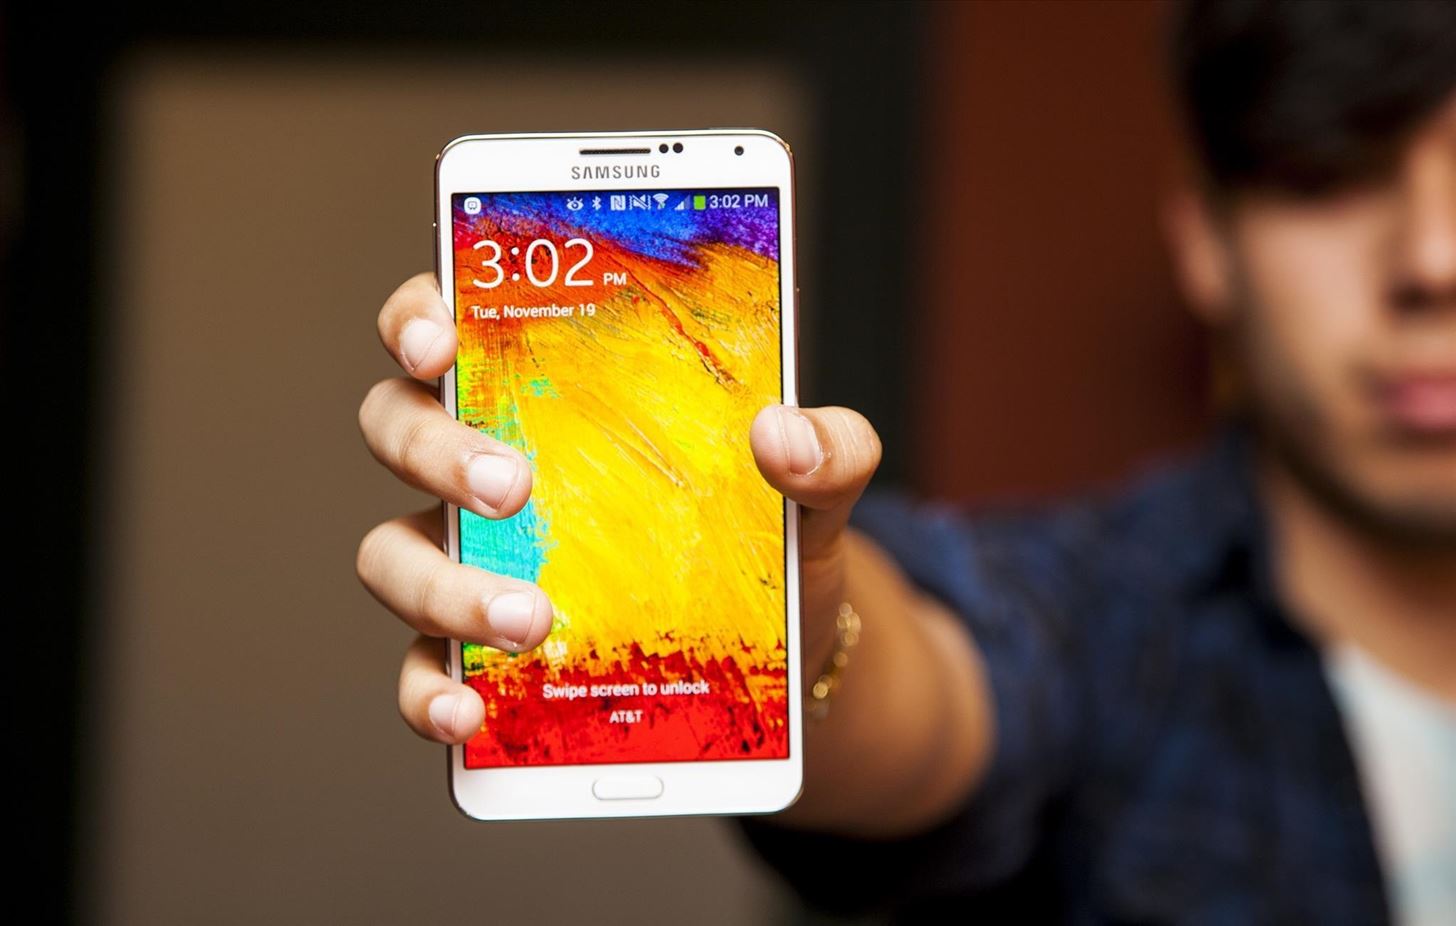 A softModder's Review of the Samsung Galaxy Note 3: "Way Better Than the Note 2"